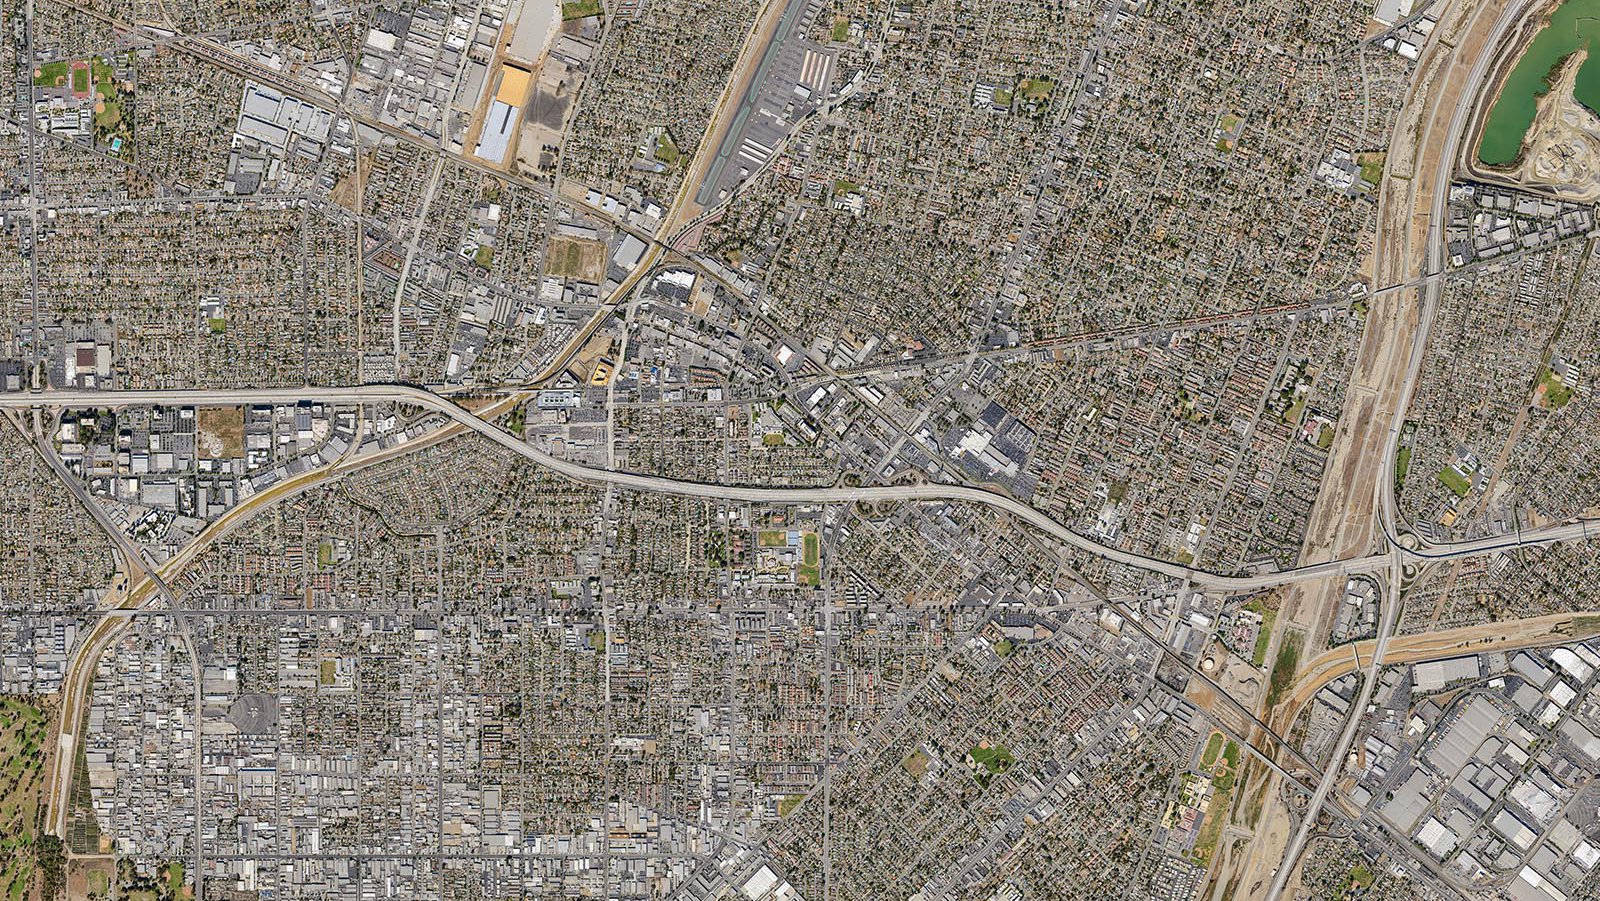 Vertical Map of the City of El Monte, California